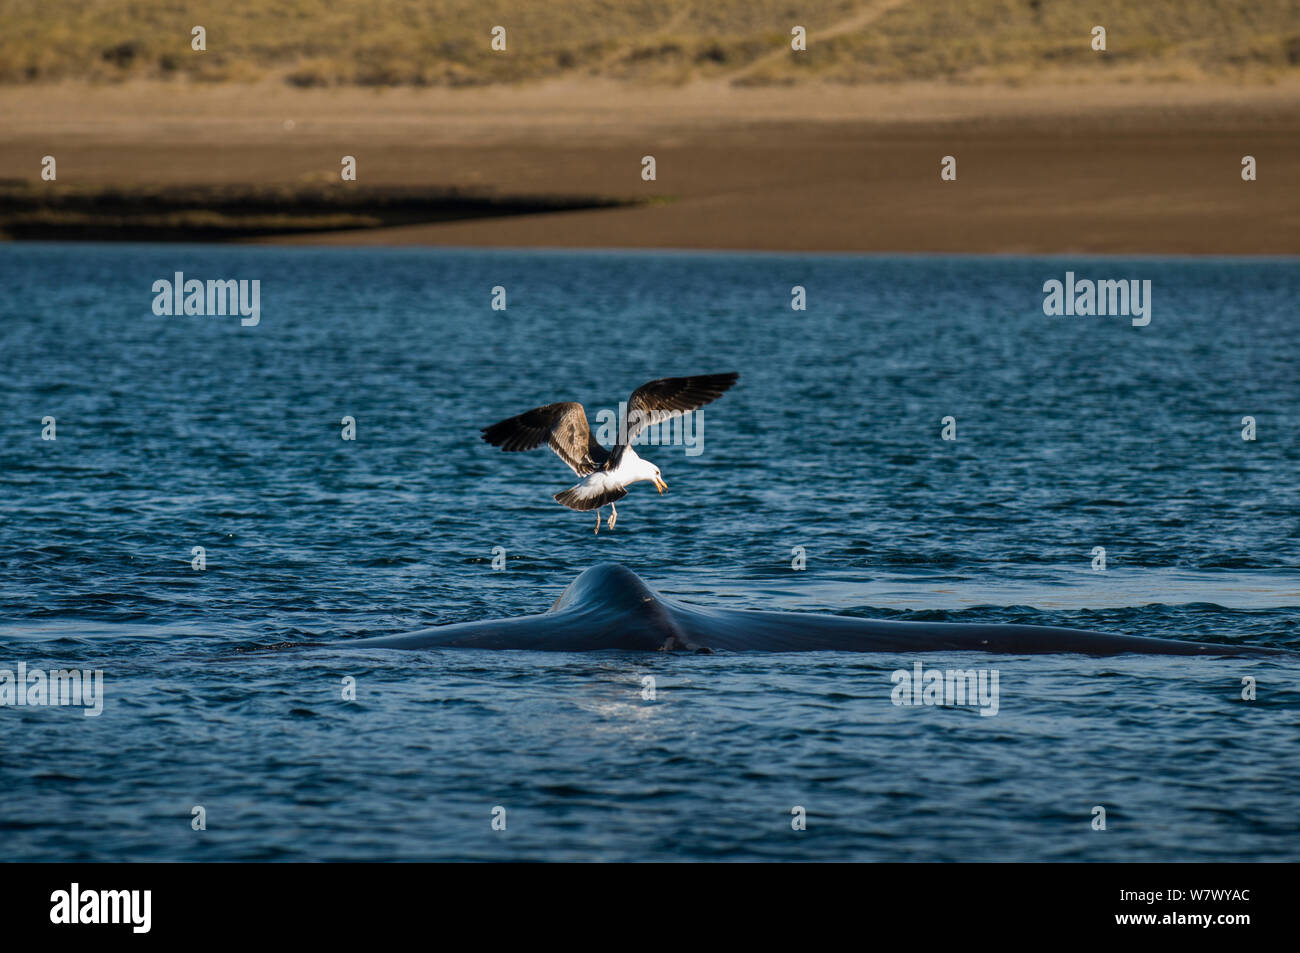 Southern right whale (Eubalaena australis) at surface with Kelp gull (Larus dominicanus) Valdes Peninsula, Chubut, Patagonia, Argentina. Stock Photo